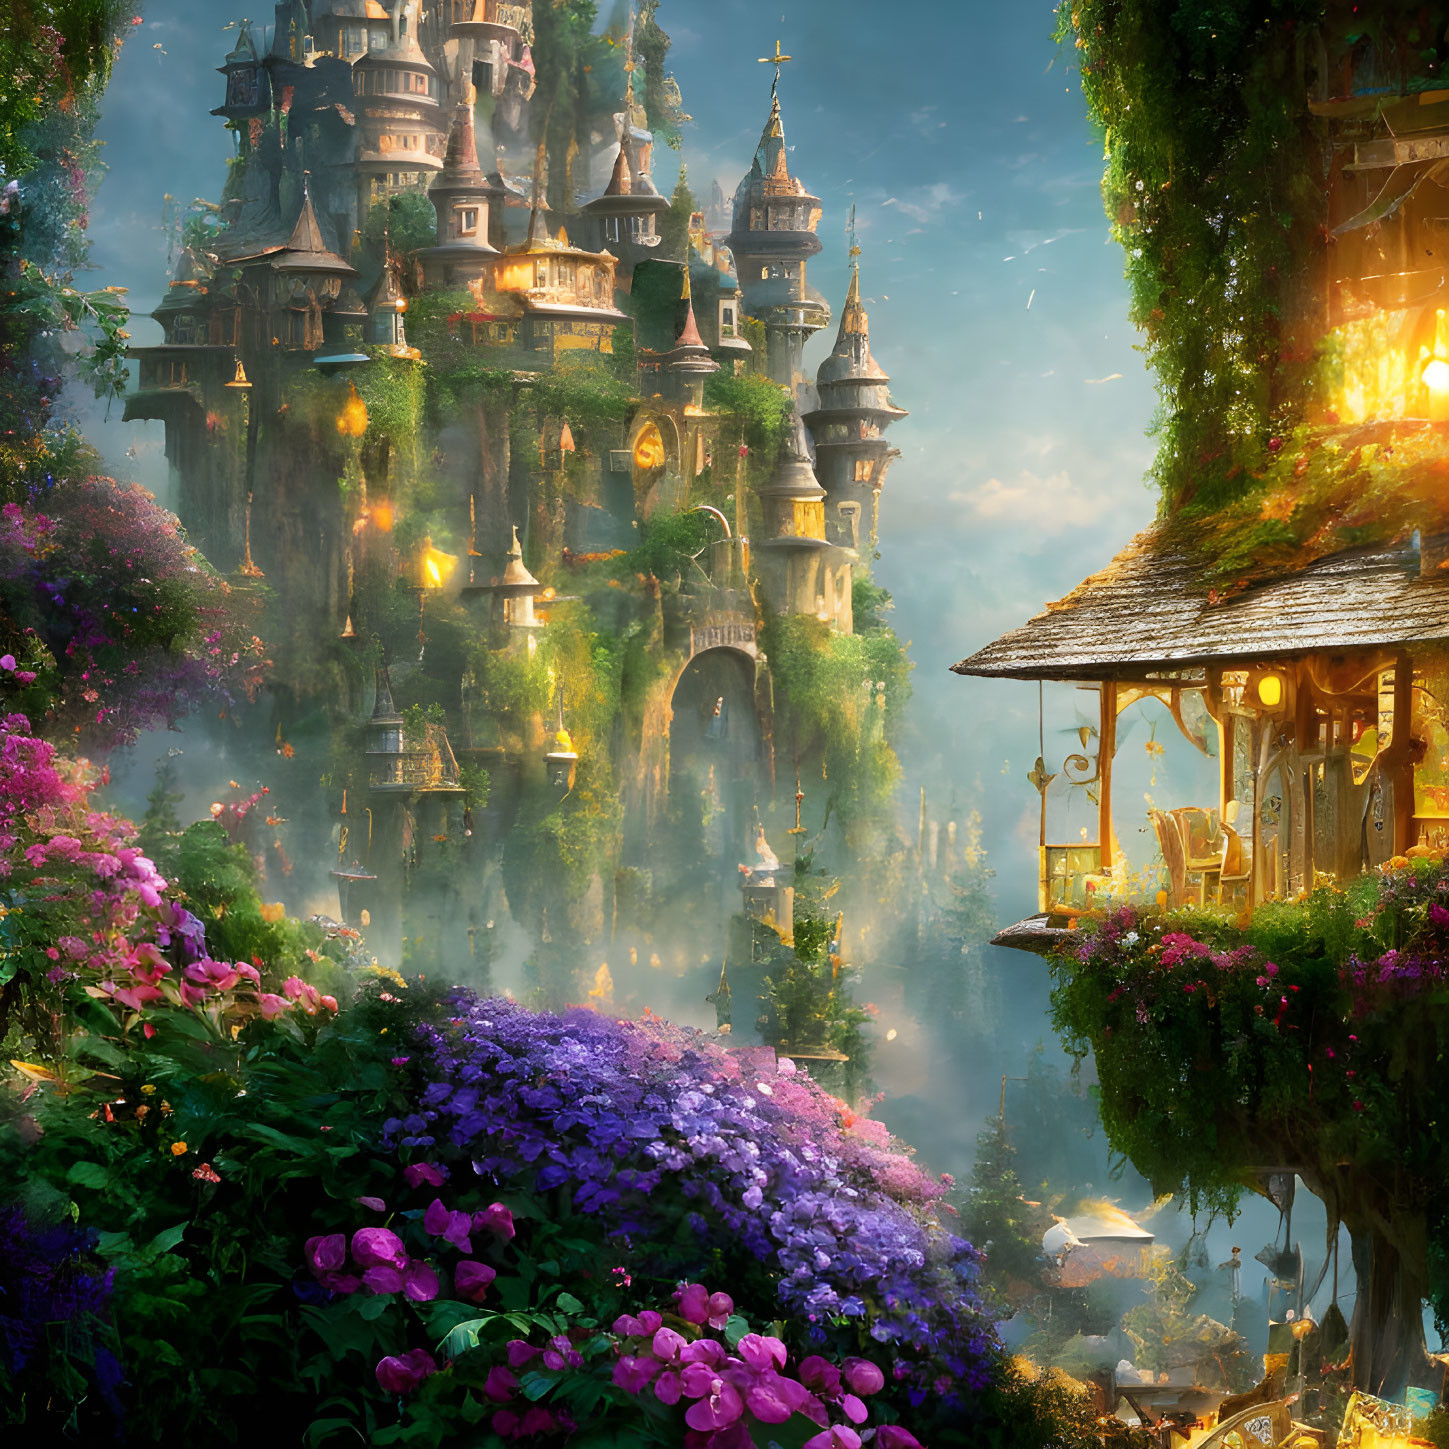 Sunlit fantasy castle surrounded by lush greenery and purple flowers.